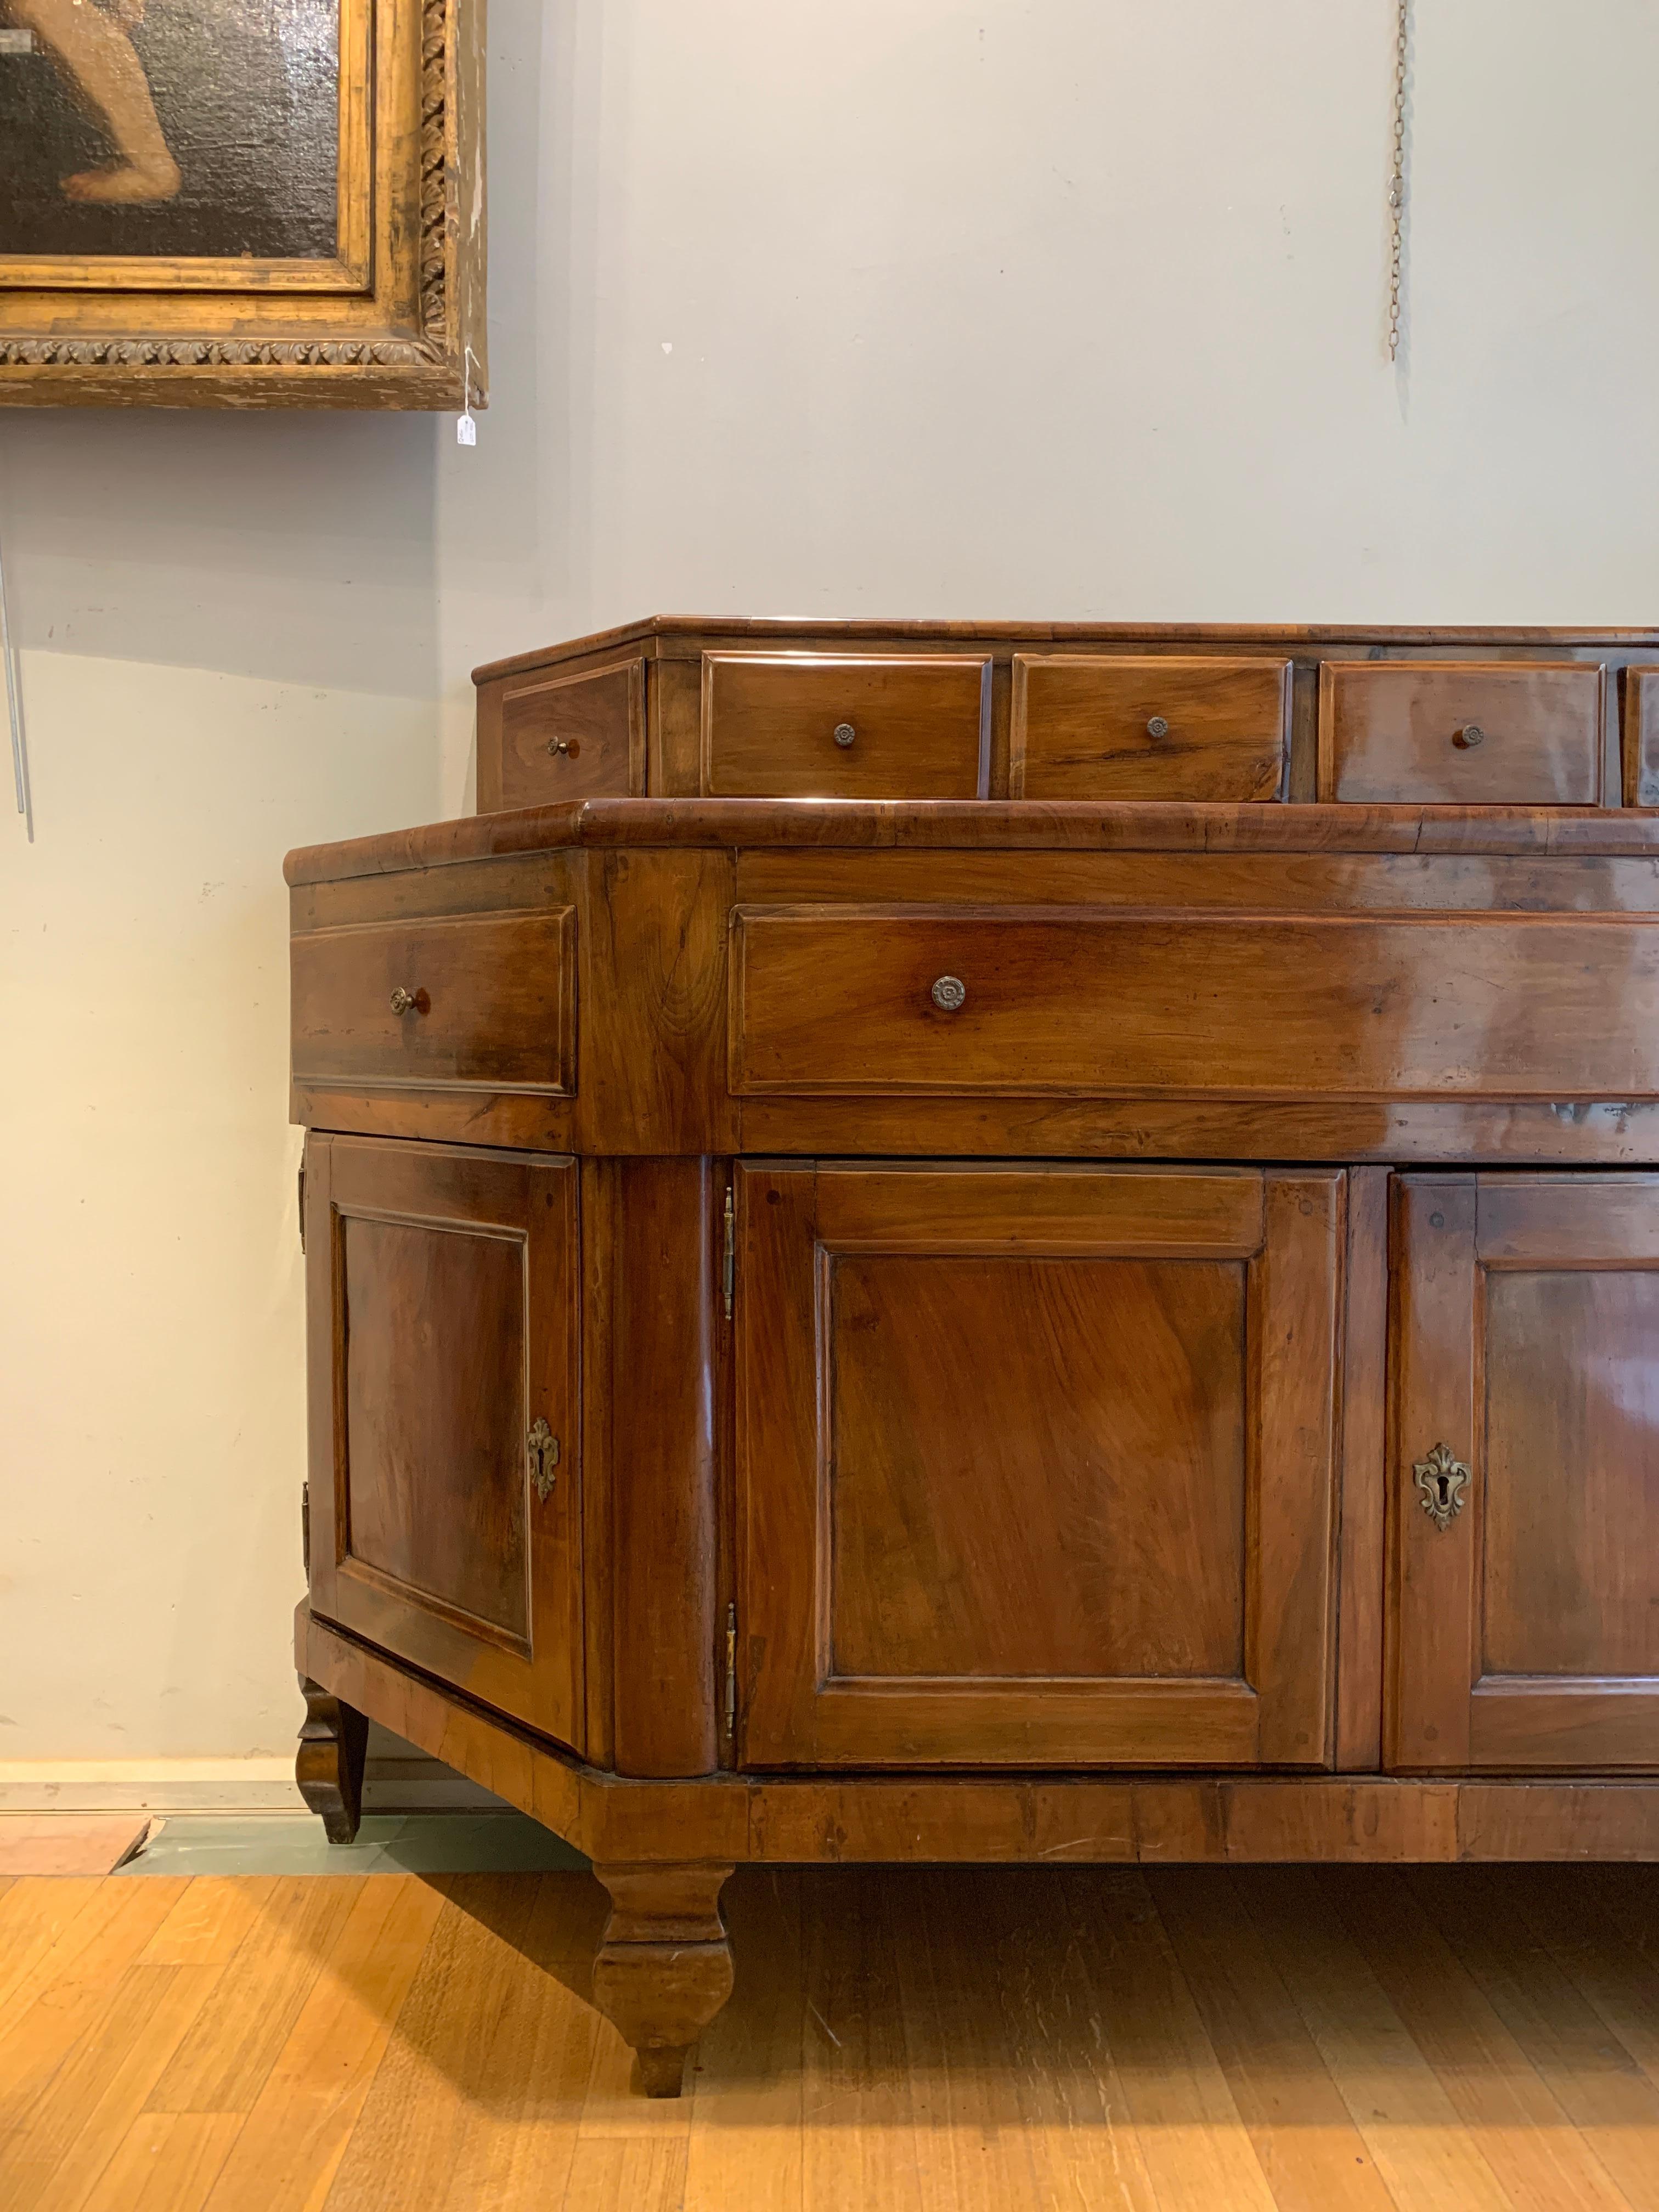 END OF THE 18th CENTURY NOTCHED SIDEBOARD For Sale 4